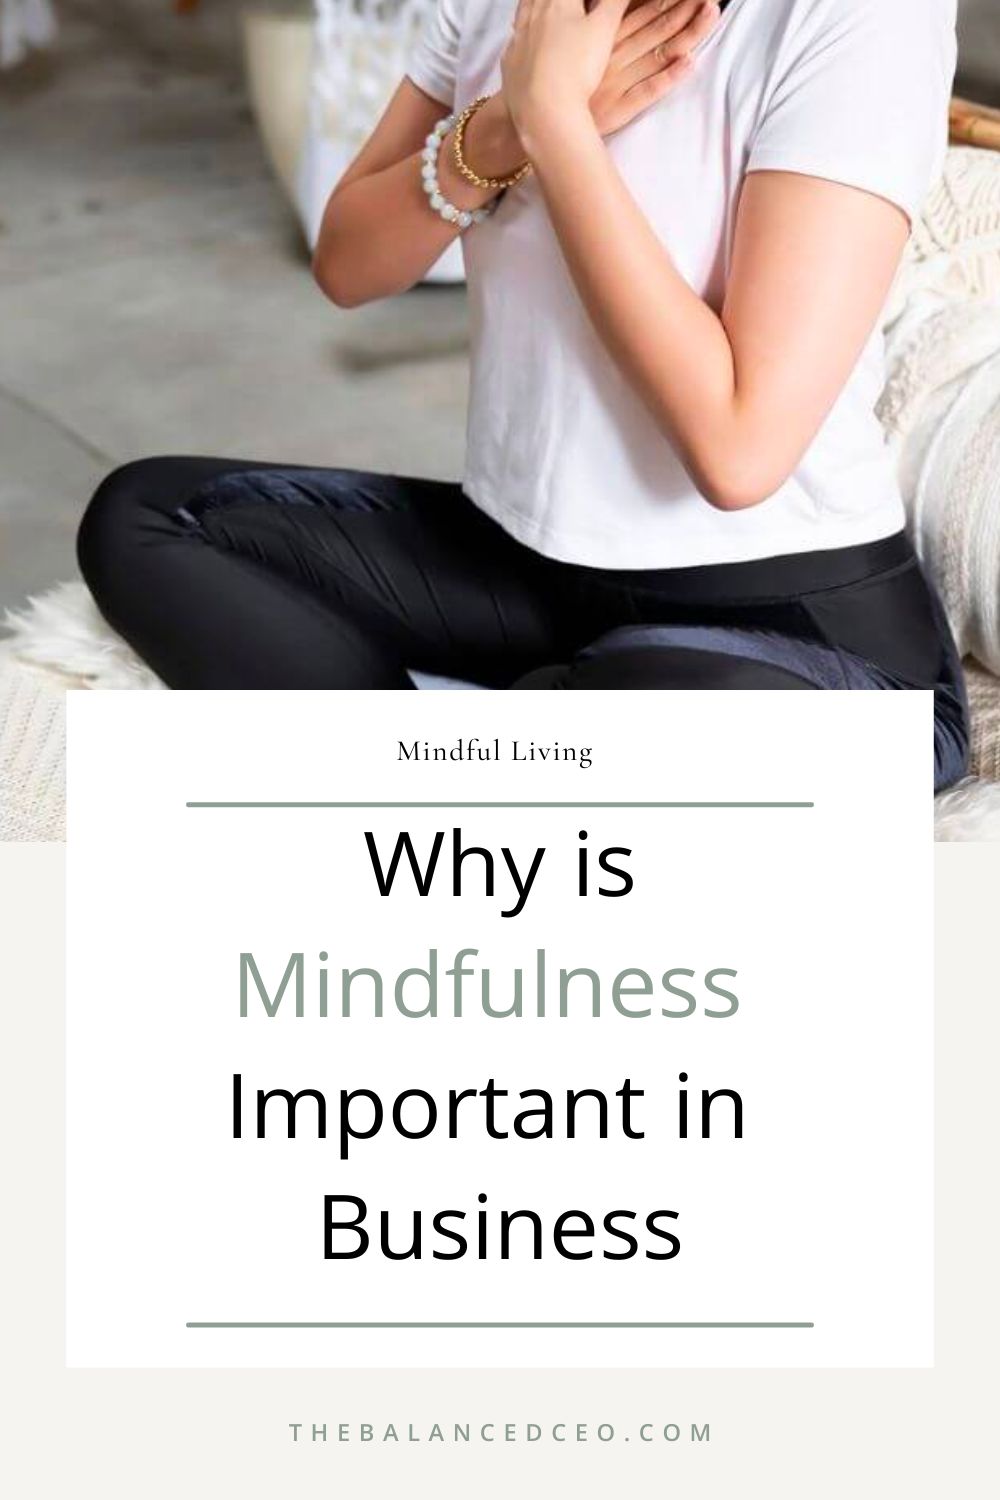 Why is Mindfulness Important in Business?